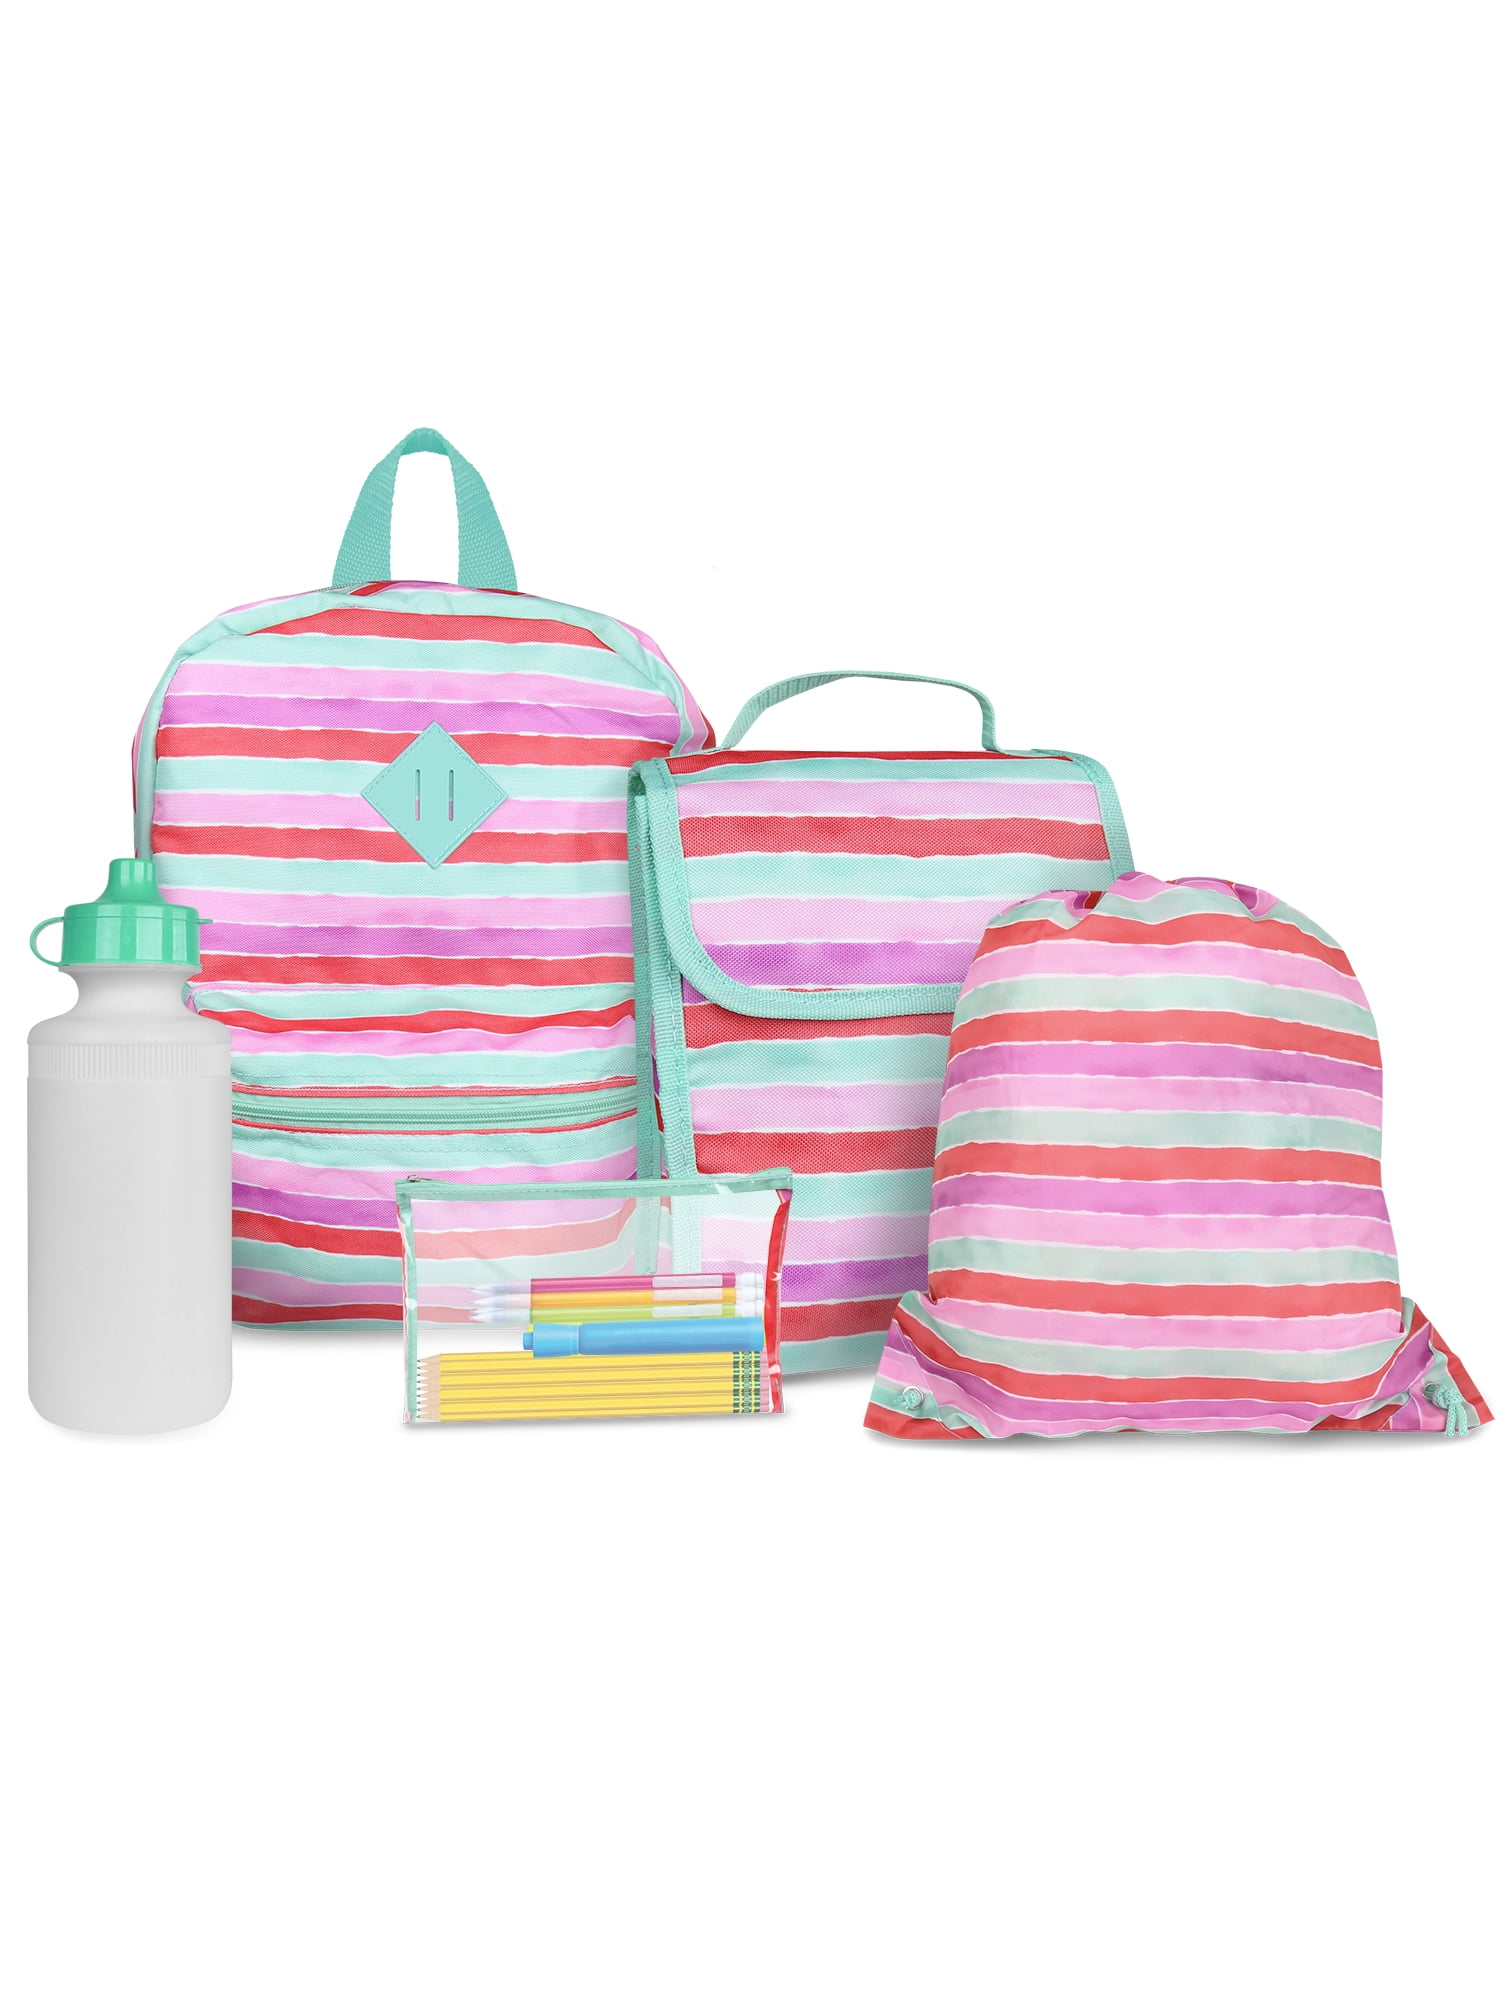 iPack Kids,5 Piece Backpack Set,Lunch Kit,Waterbottl,Cinch & Pencil Bag~FREE SHP 